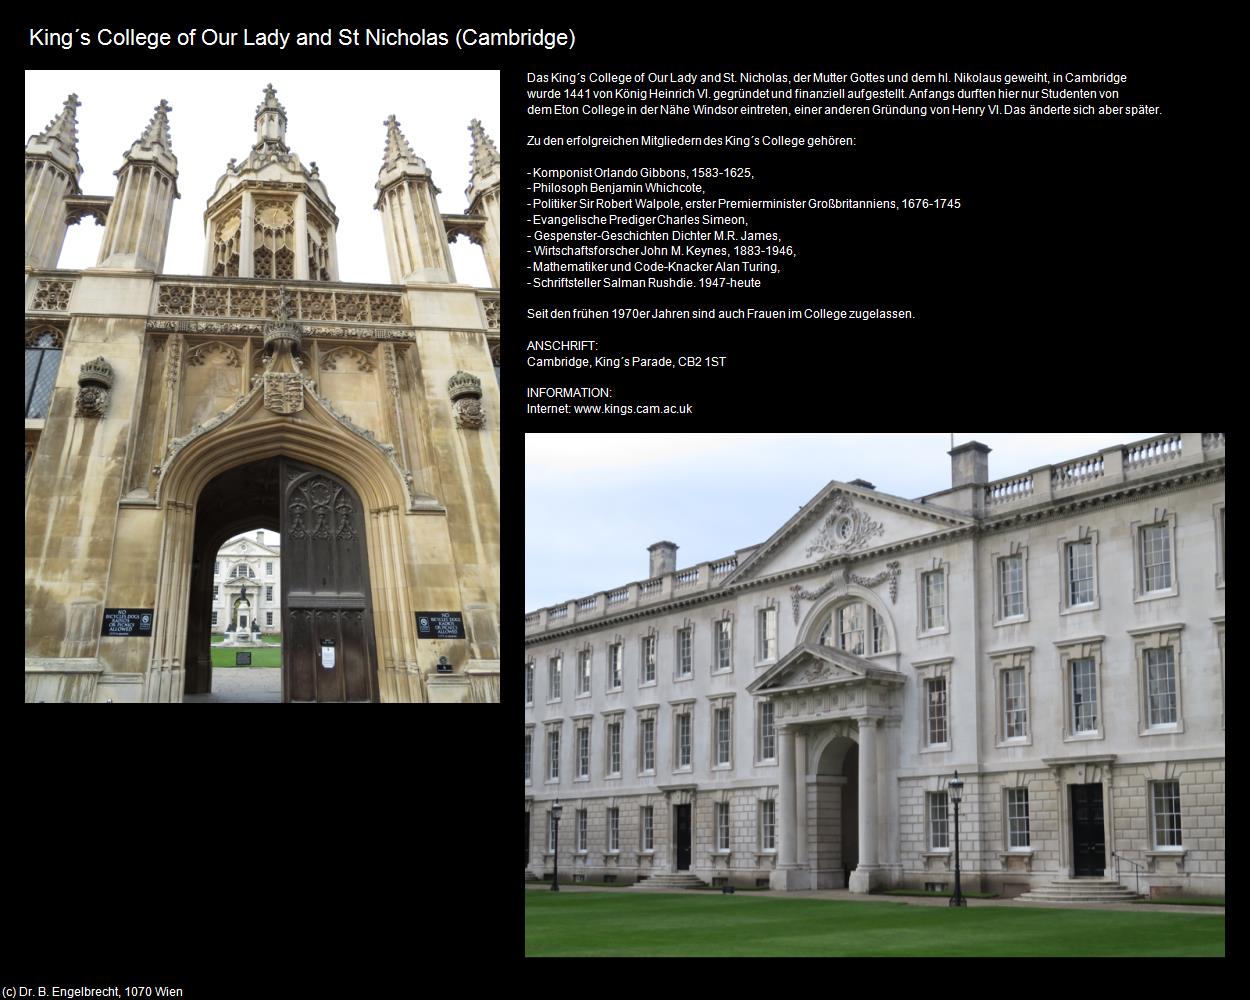 King‘s College of Our Lady and St Nicholas (Cambridge, England) in Kulturatlas-ENGLAND und WALES